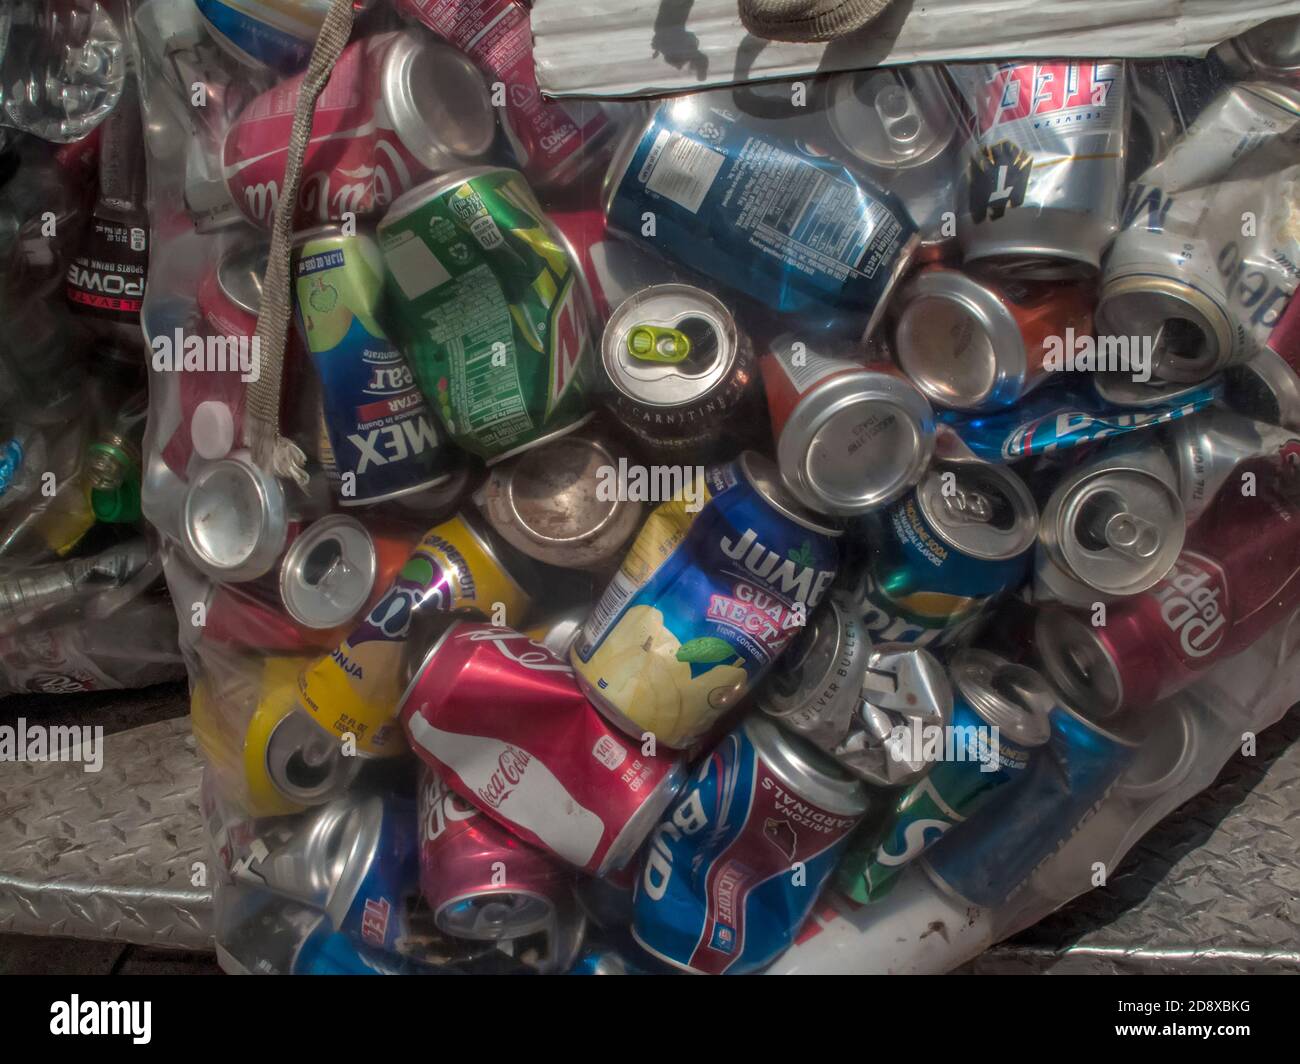 Soda drink cans collected for recycling Stock Photo